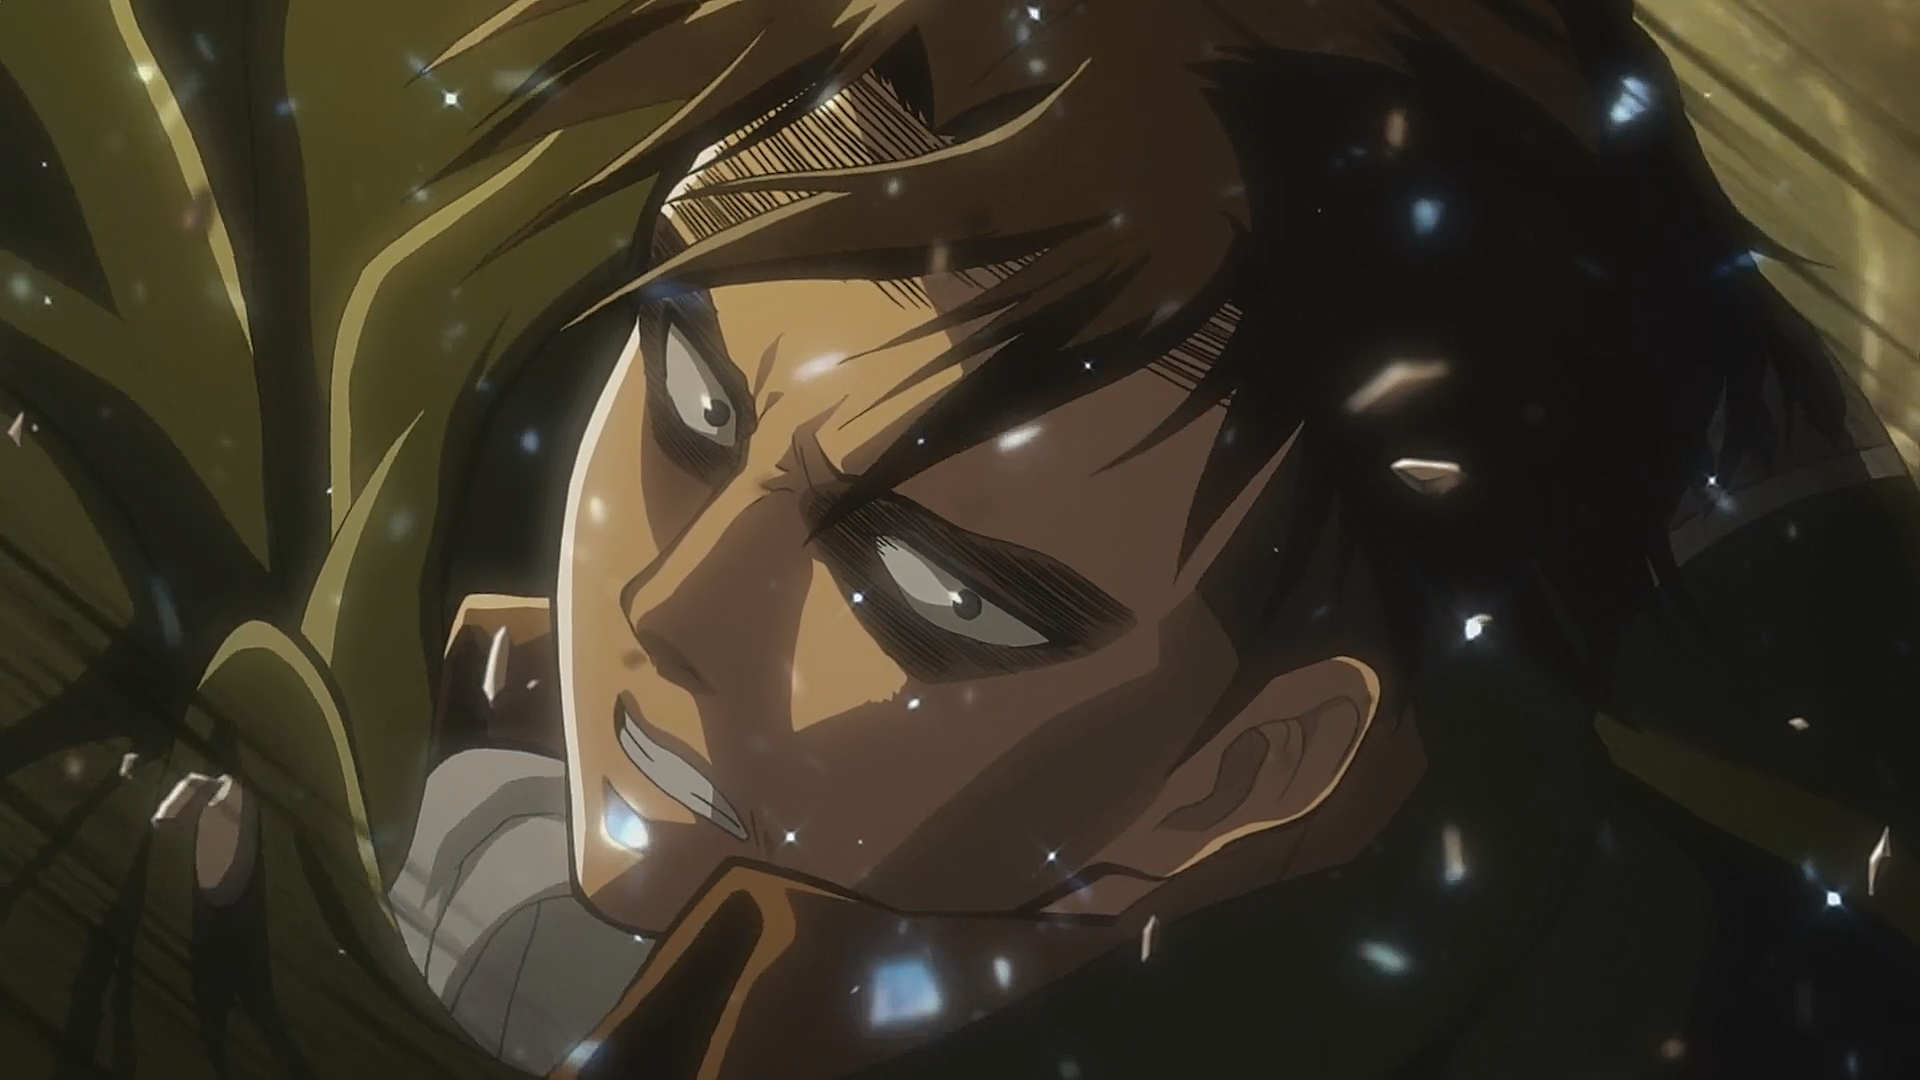 Erwin Smith: The 57th Exterior Scouting Mission, Part 4, Attack on Titan  Wiki